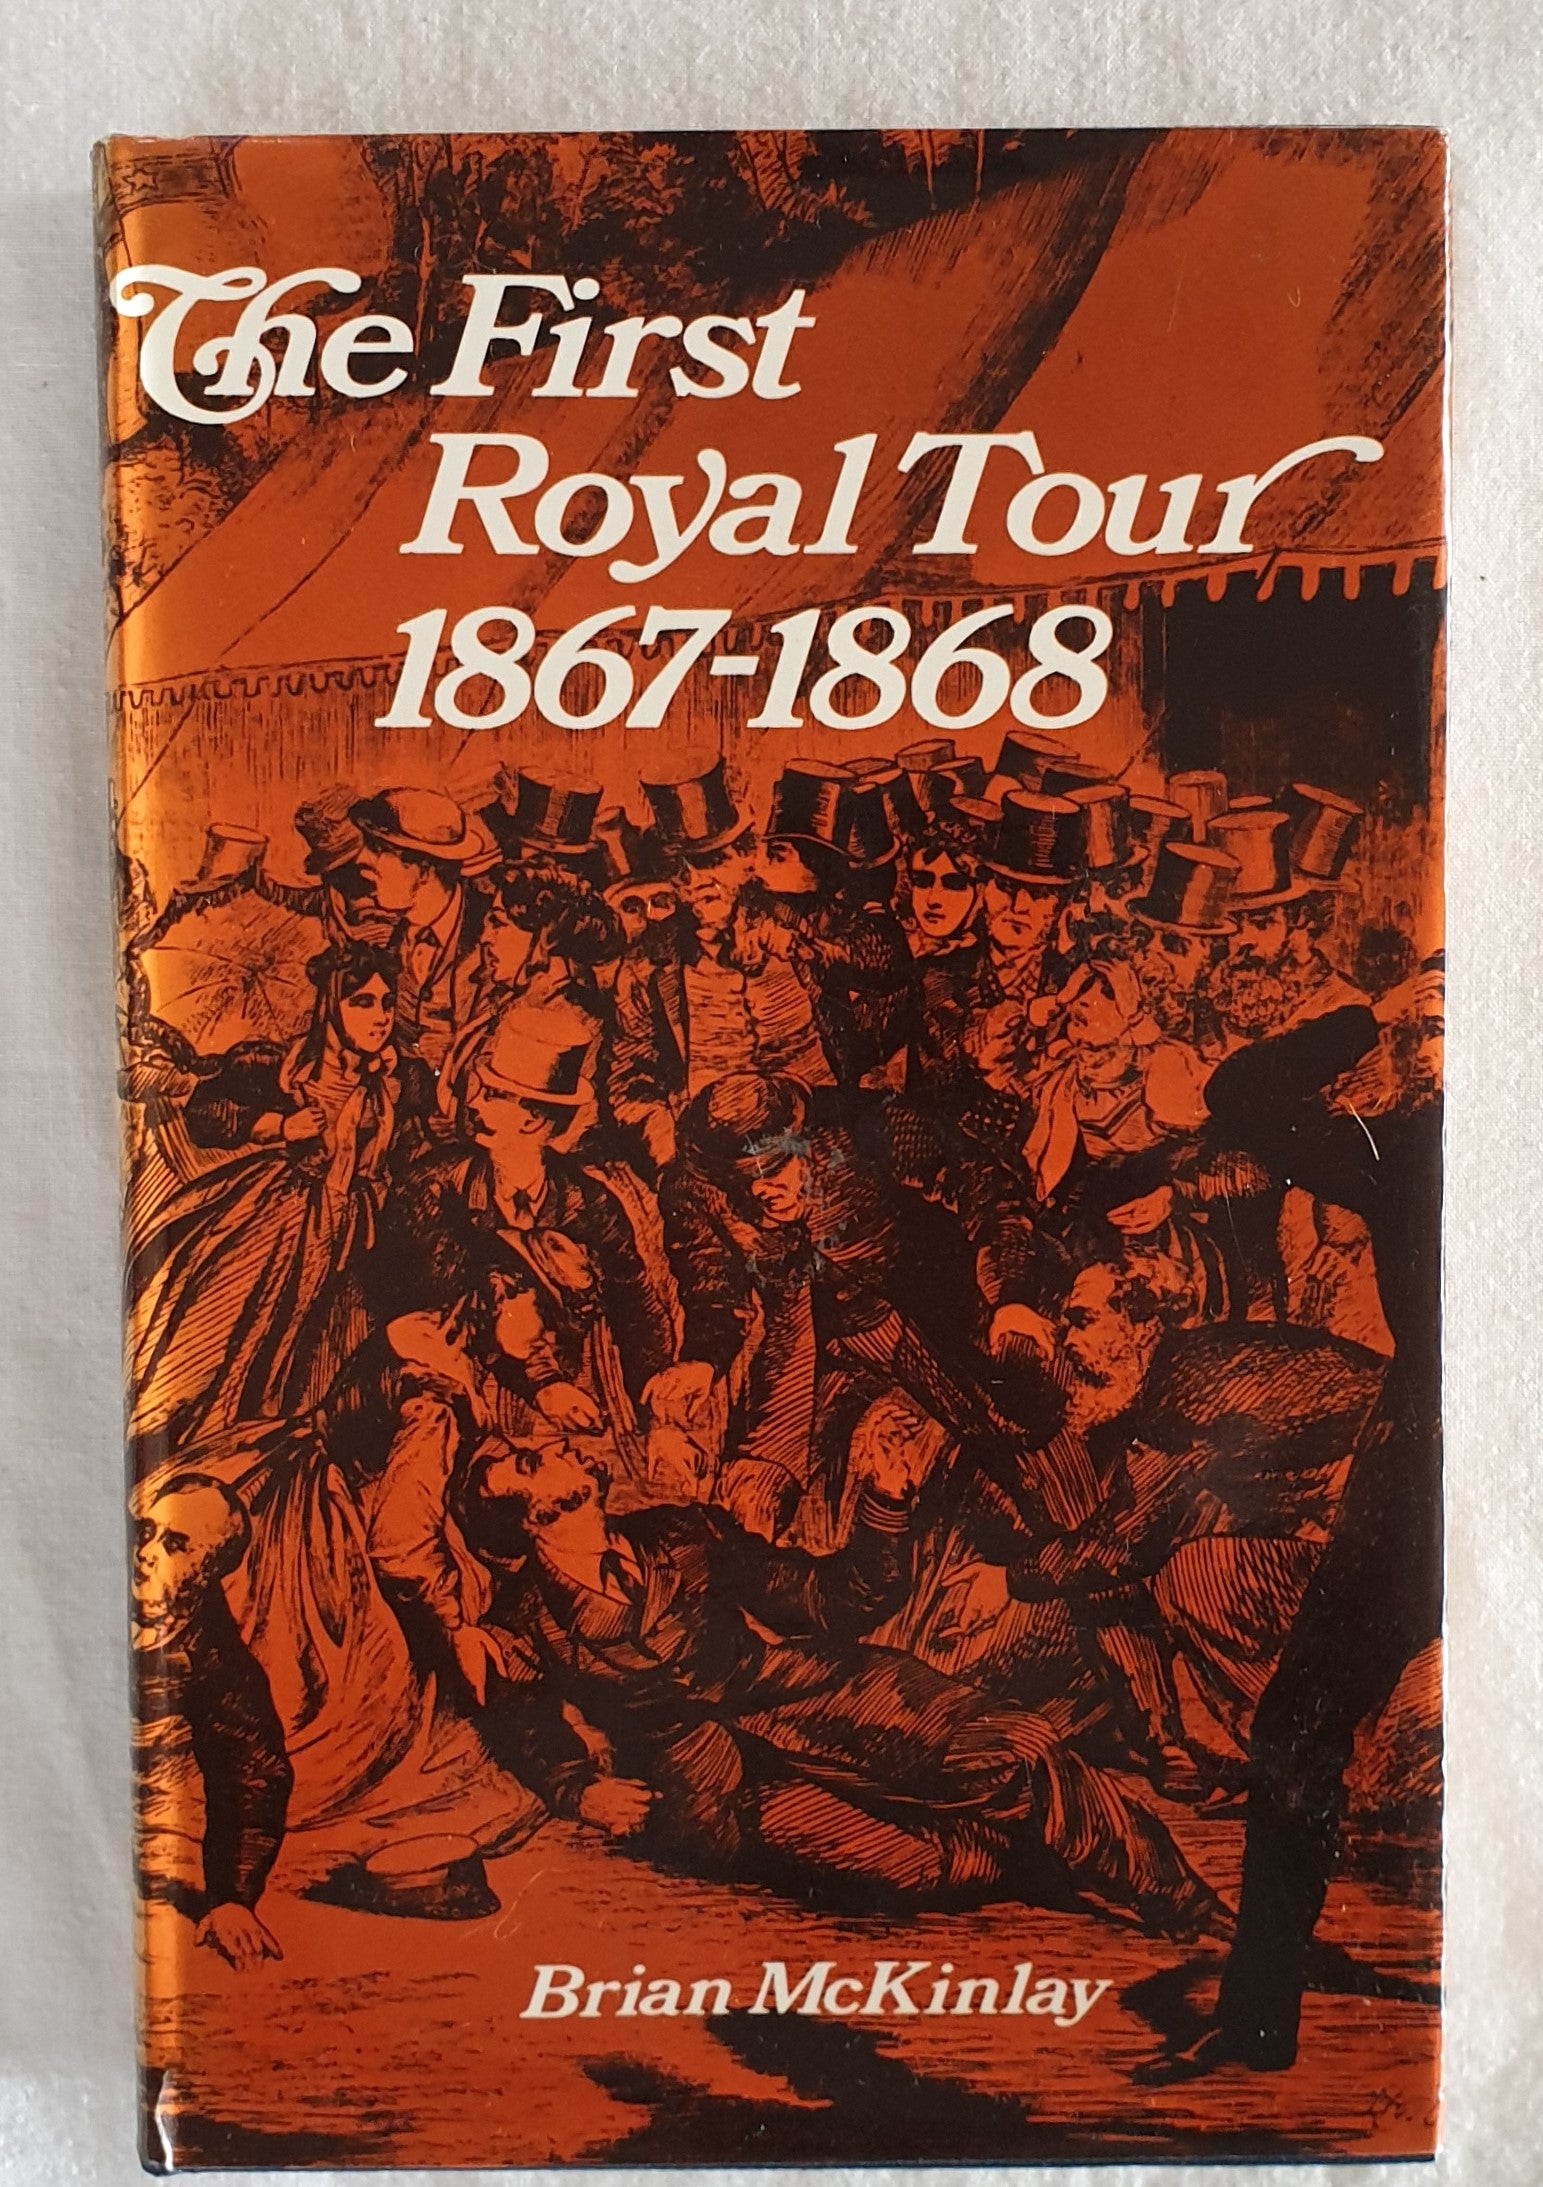 The First Royal Tour 1867-1868 by Brian McKinlay